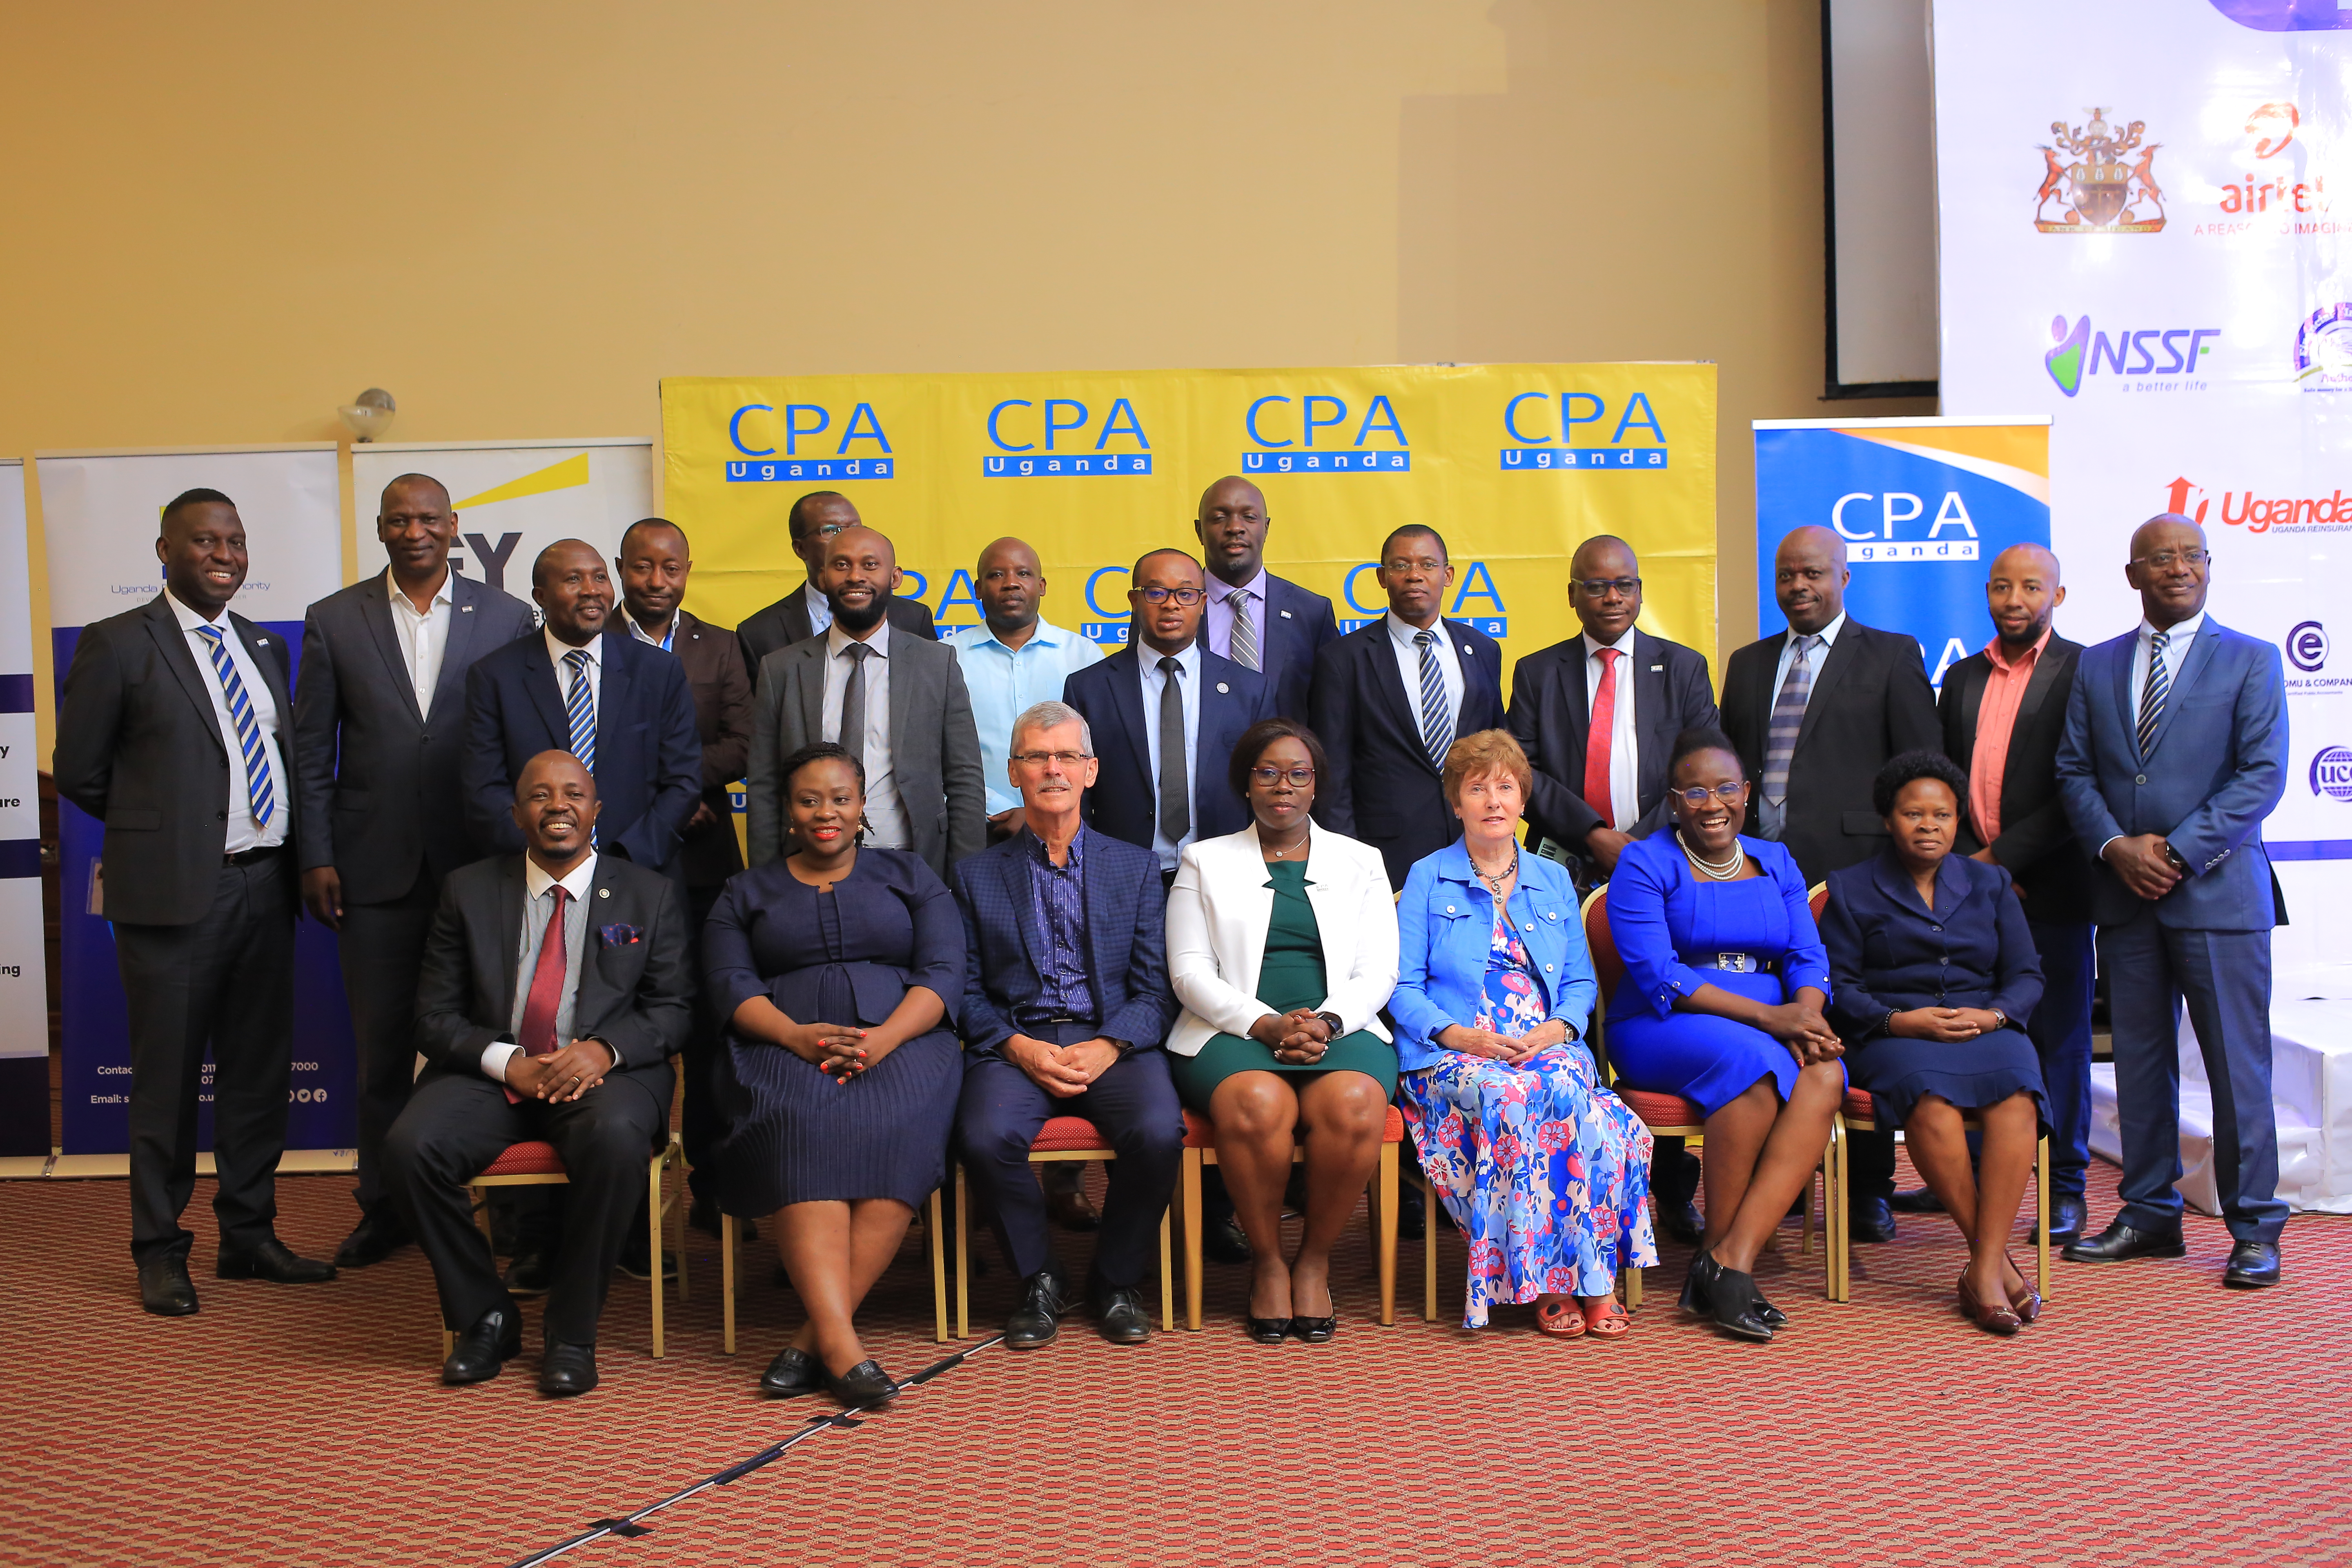 Some delates from East Africa Community Institutes of Accountancy pose for a photo with the Keynote Speaker Dr Ian Clarke (3rd left) ICPAU President CPA Josephine Okui Ossiya